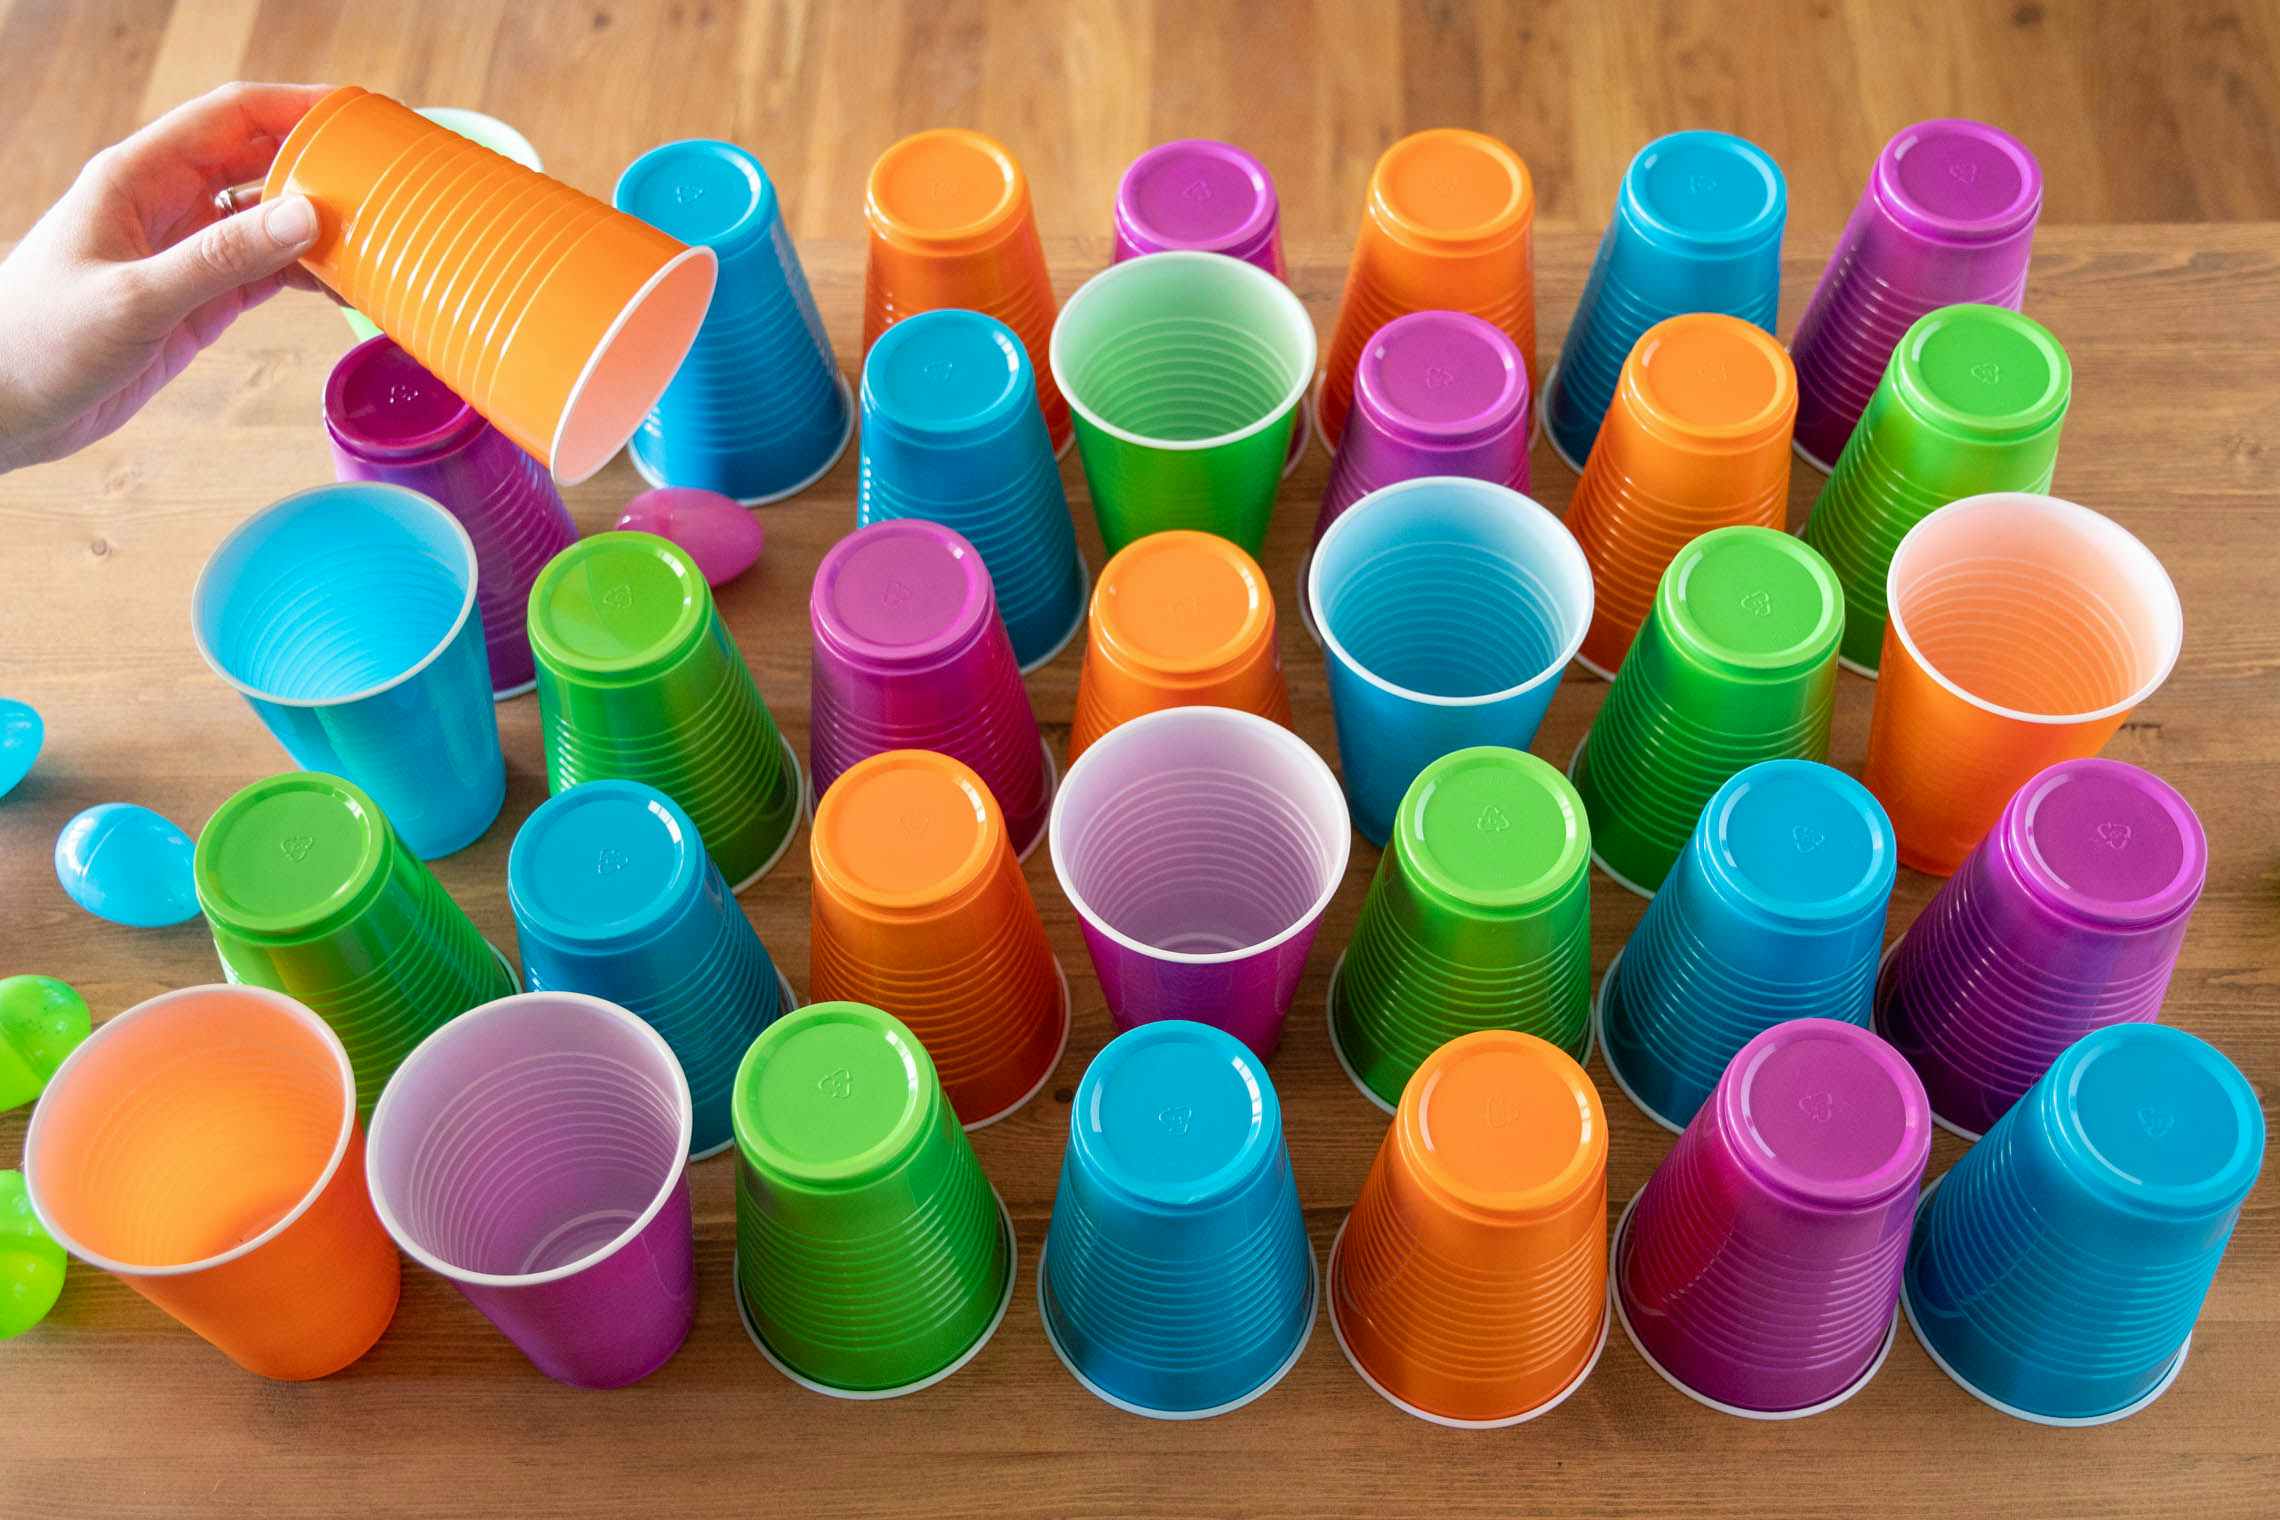 Pink, green, orange, and blue plastic cups set out on a table in a pattern with plastic Easter eggs under them and next to them.